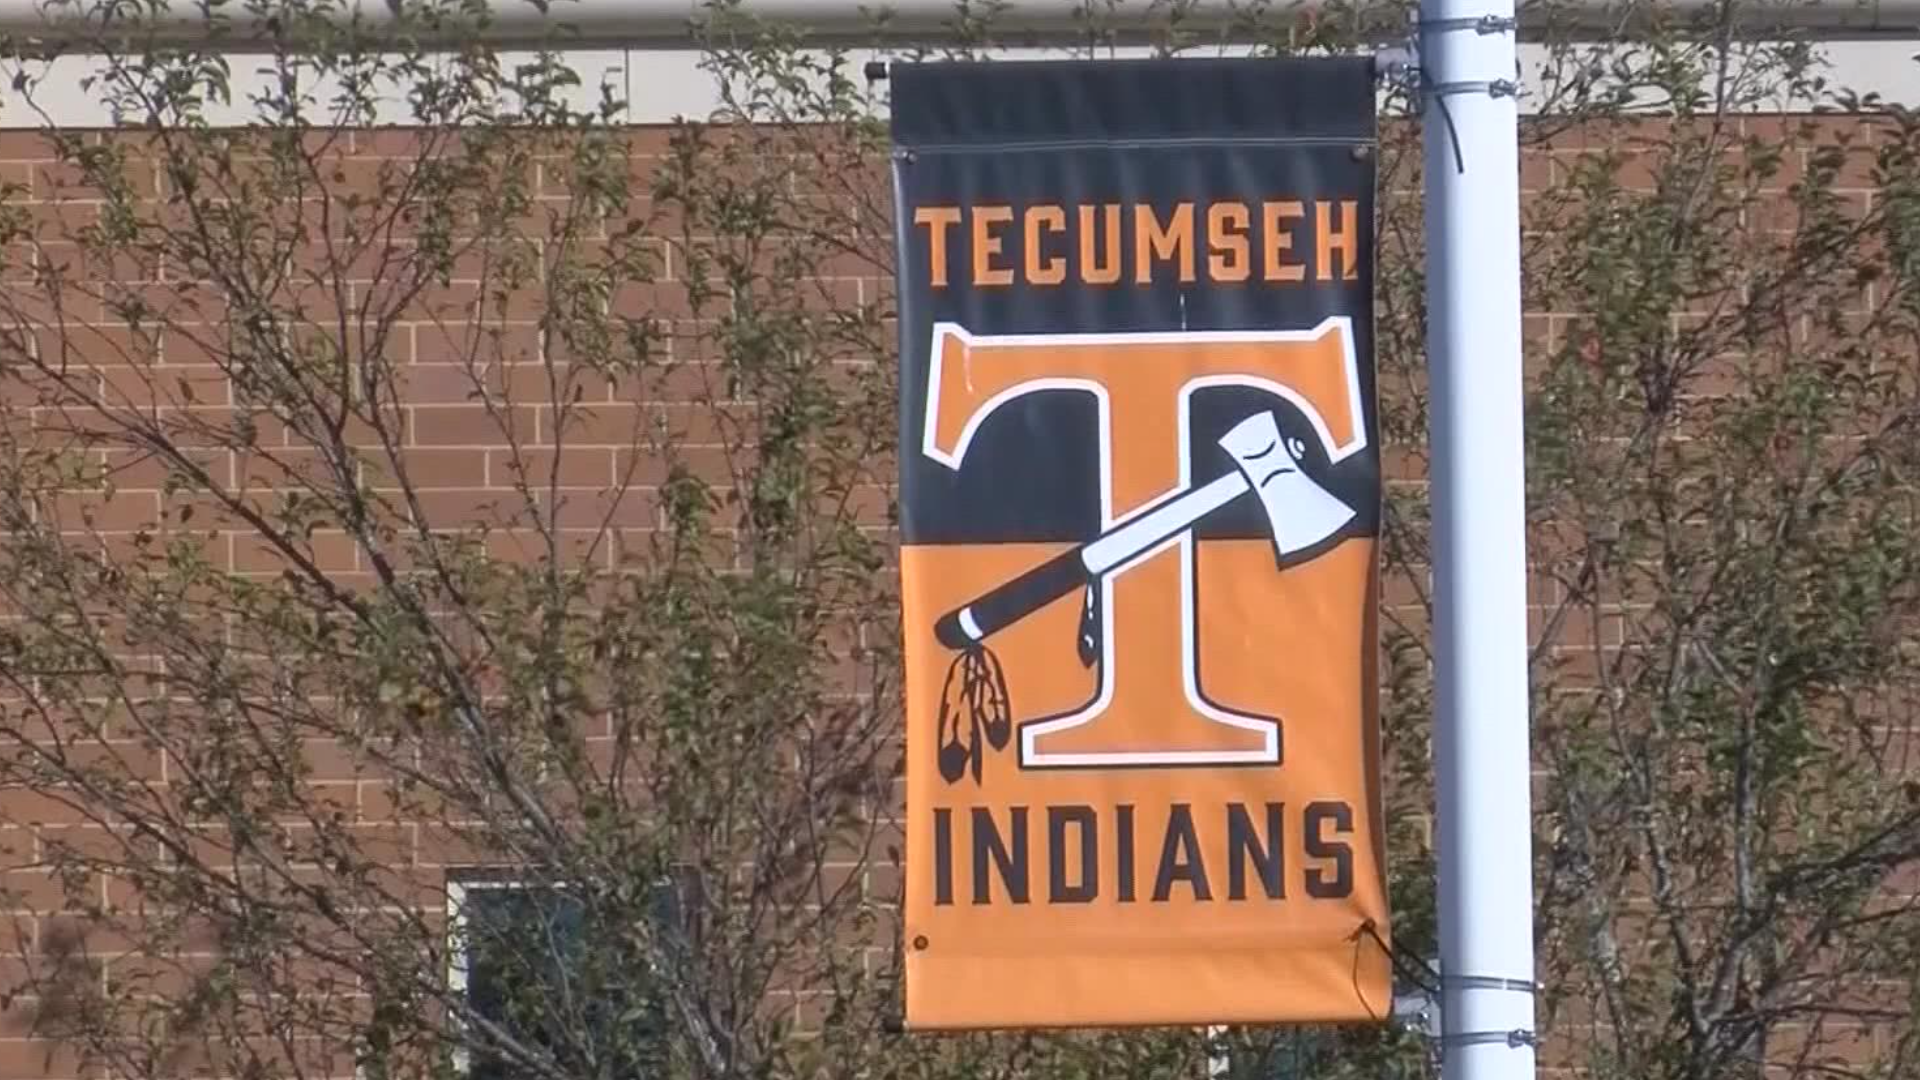 Tecumseh High School is about 90 miles south of Oxford High School, where a gunman opened fire Tuesday, killing four students.